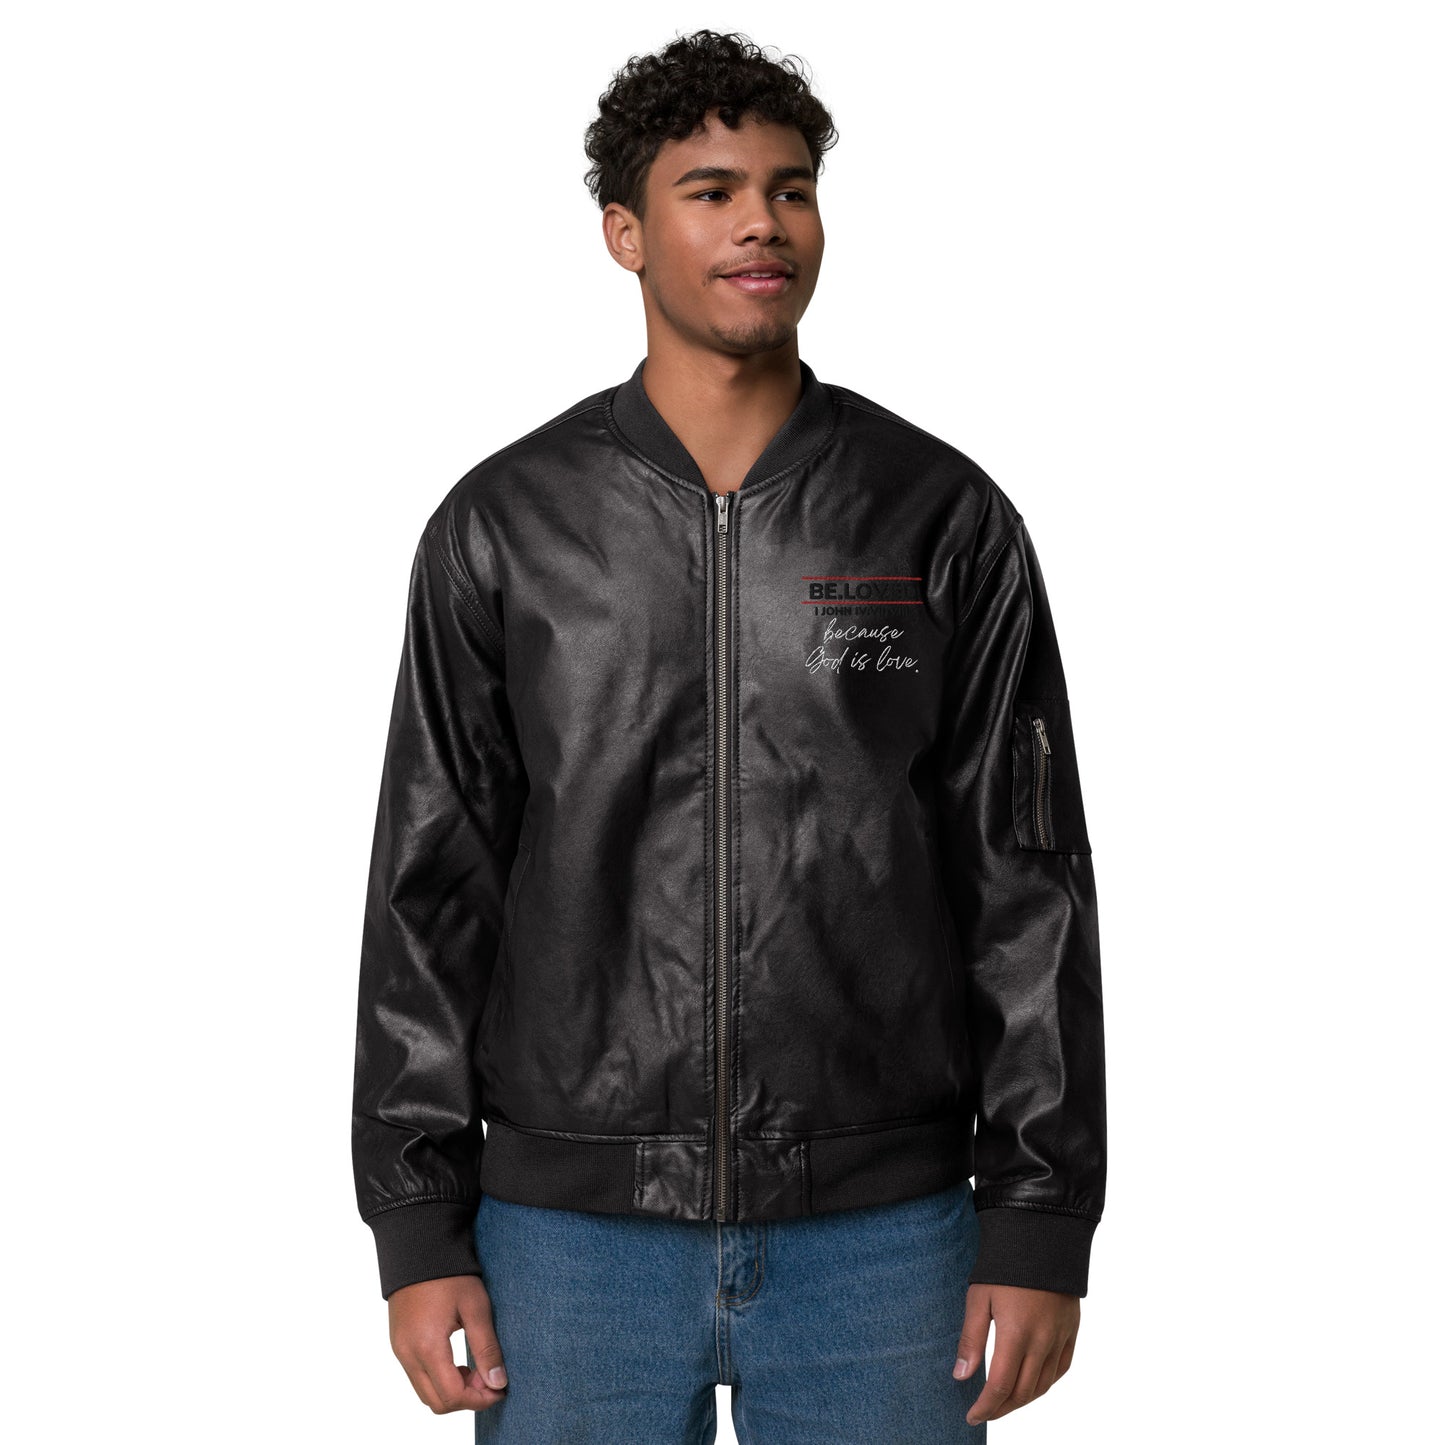 because God is Love Leather Bomber Jacket